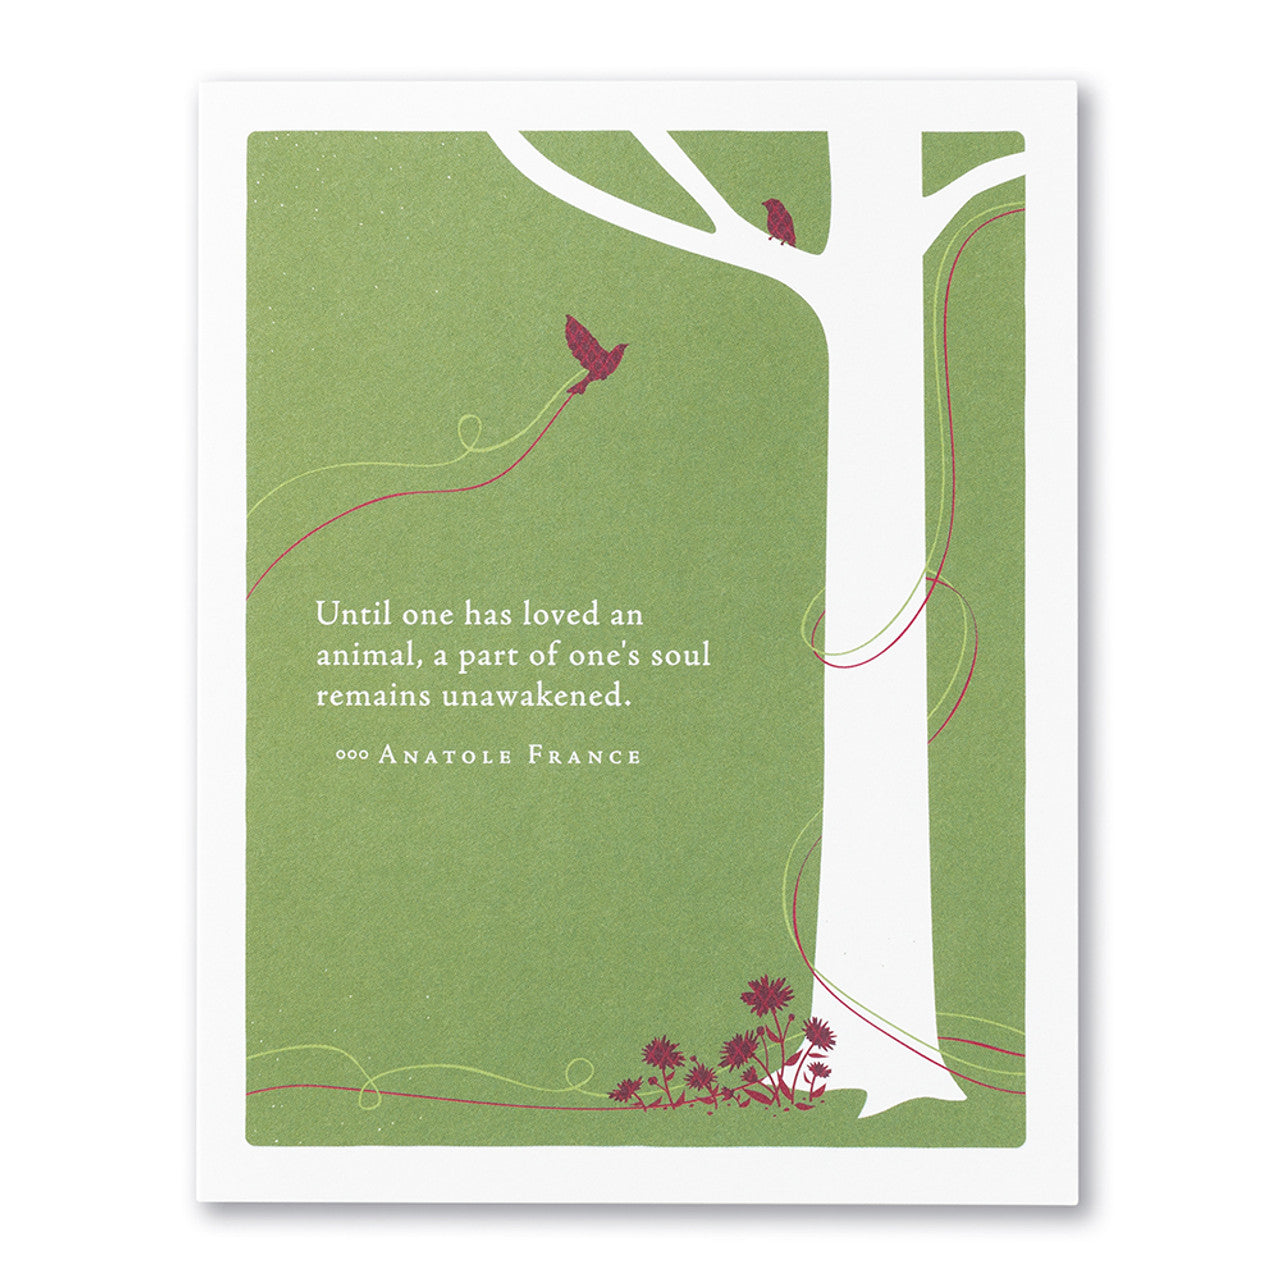 Positively Green Pet Sympathy Greeting Card - "Until one has loved an animal, a part of one's soul remains unawakened." —Anatole France - Mellow Monkey